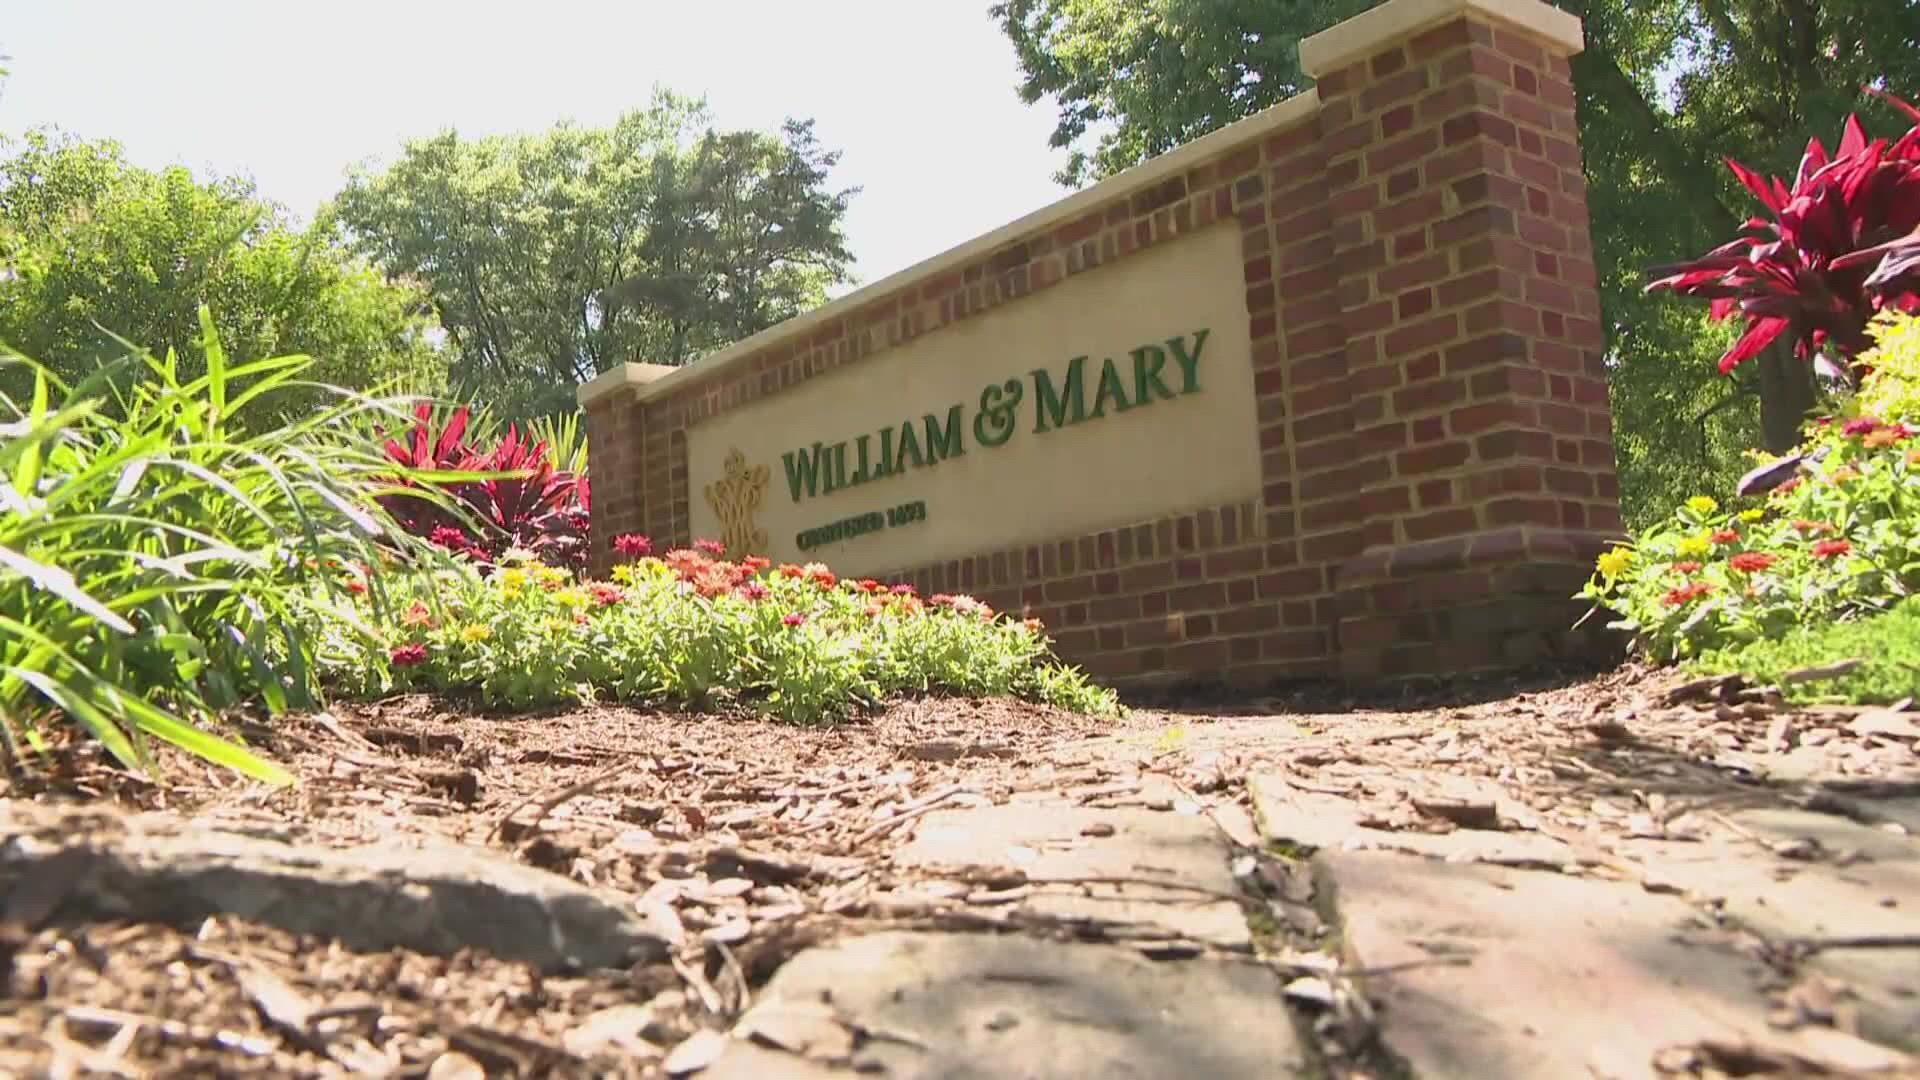 "This is not a test. Shelter in Place," a tweet from William & Mary News read.